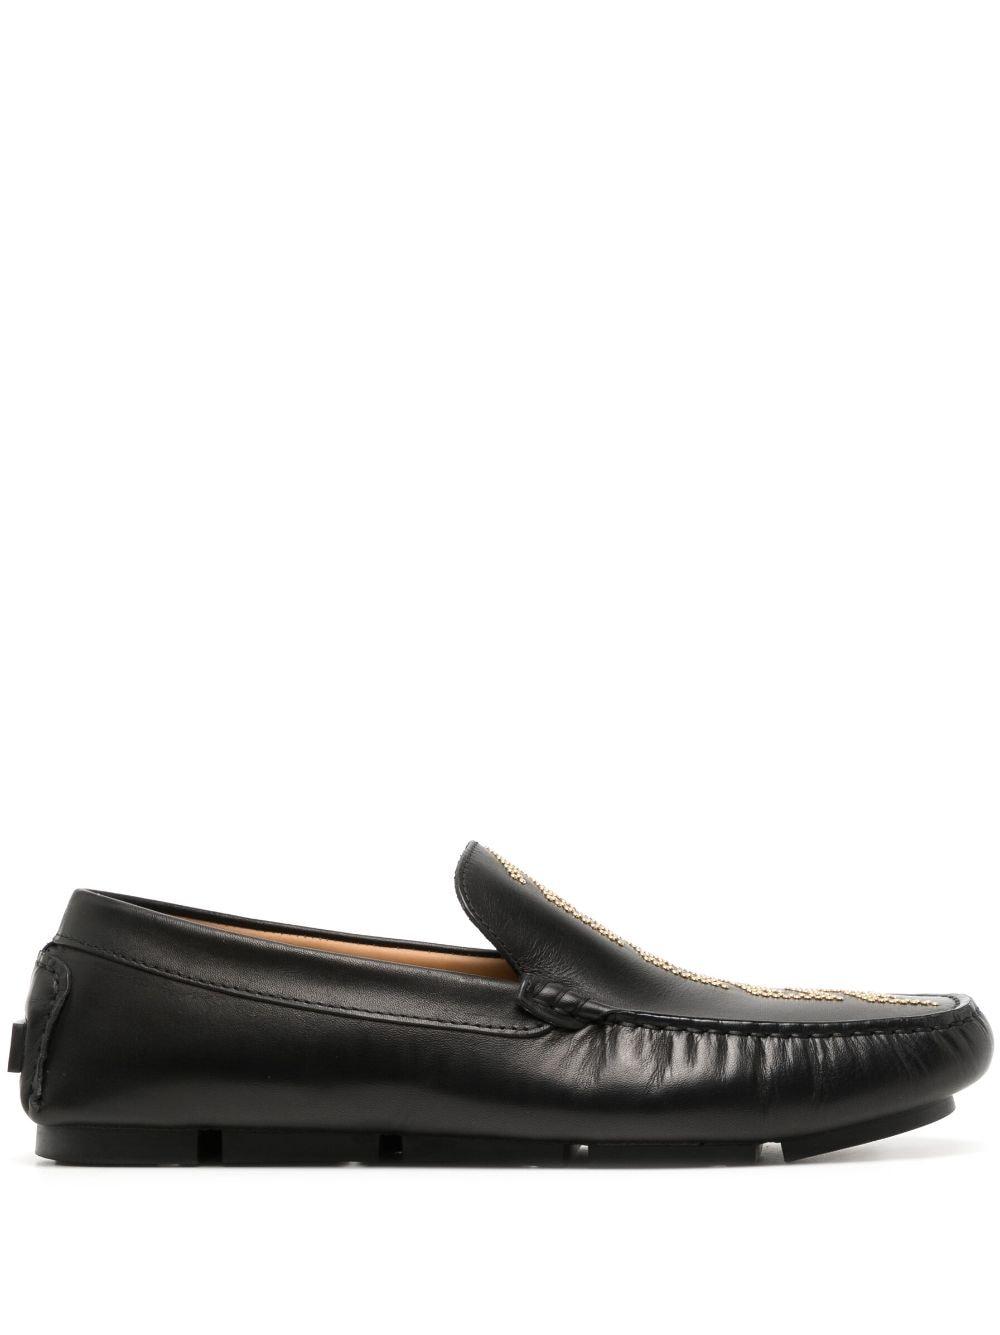 Versace Studded Greca Leather Loafers in Black for Men | Lyst